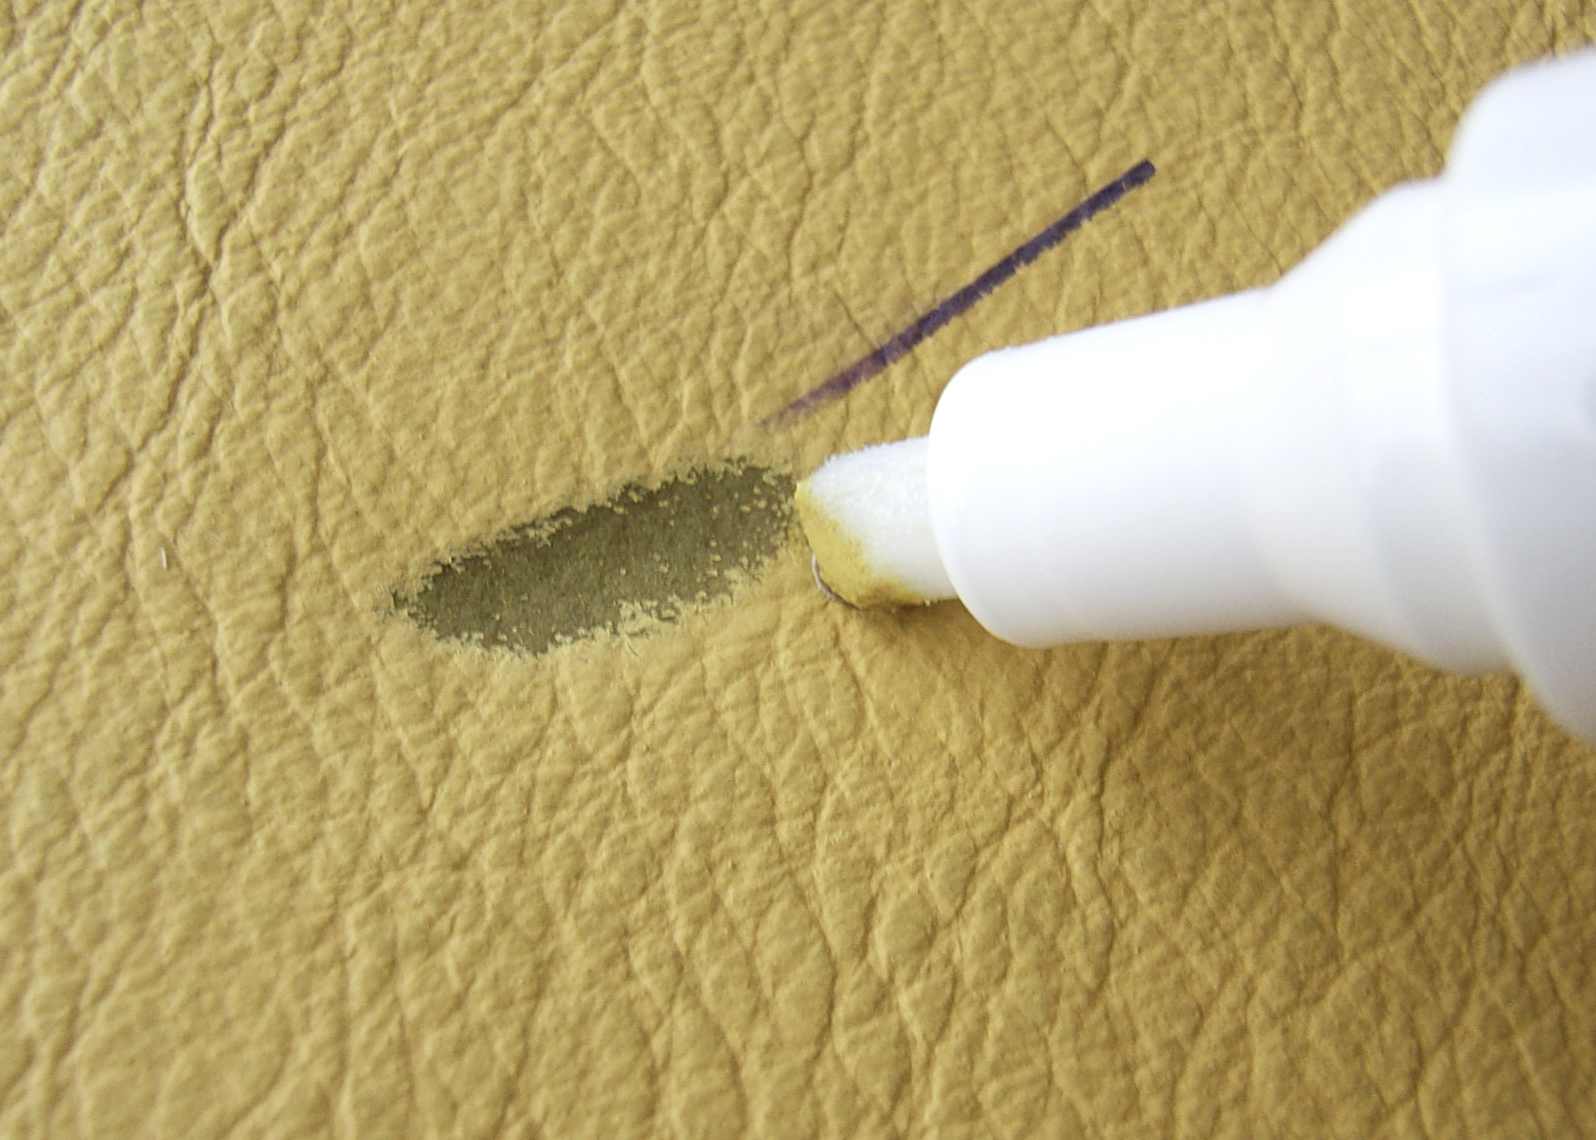 How to remove ink, biro & ballpoint pen marks from leather?